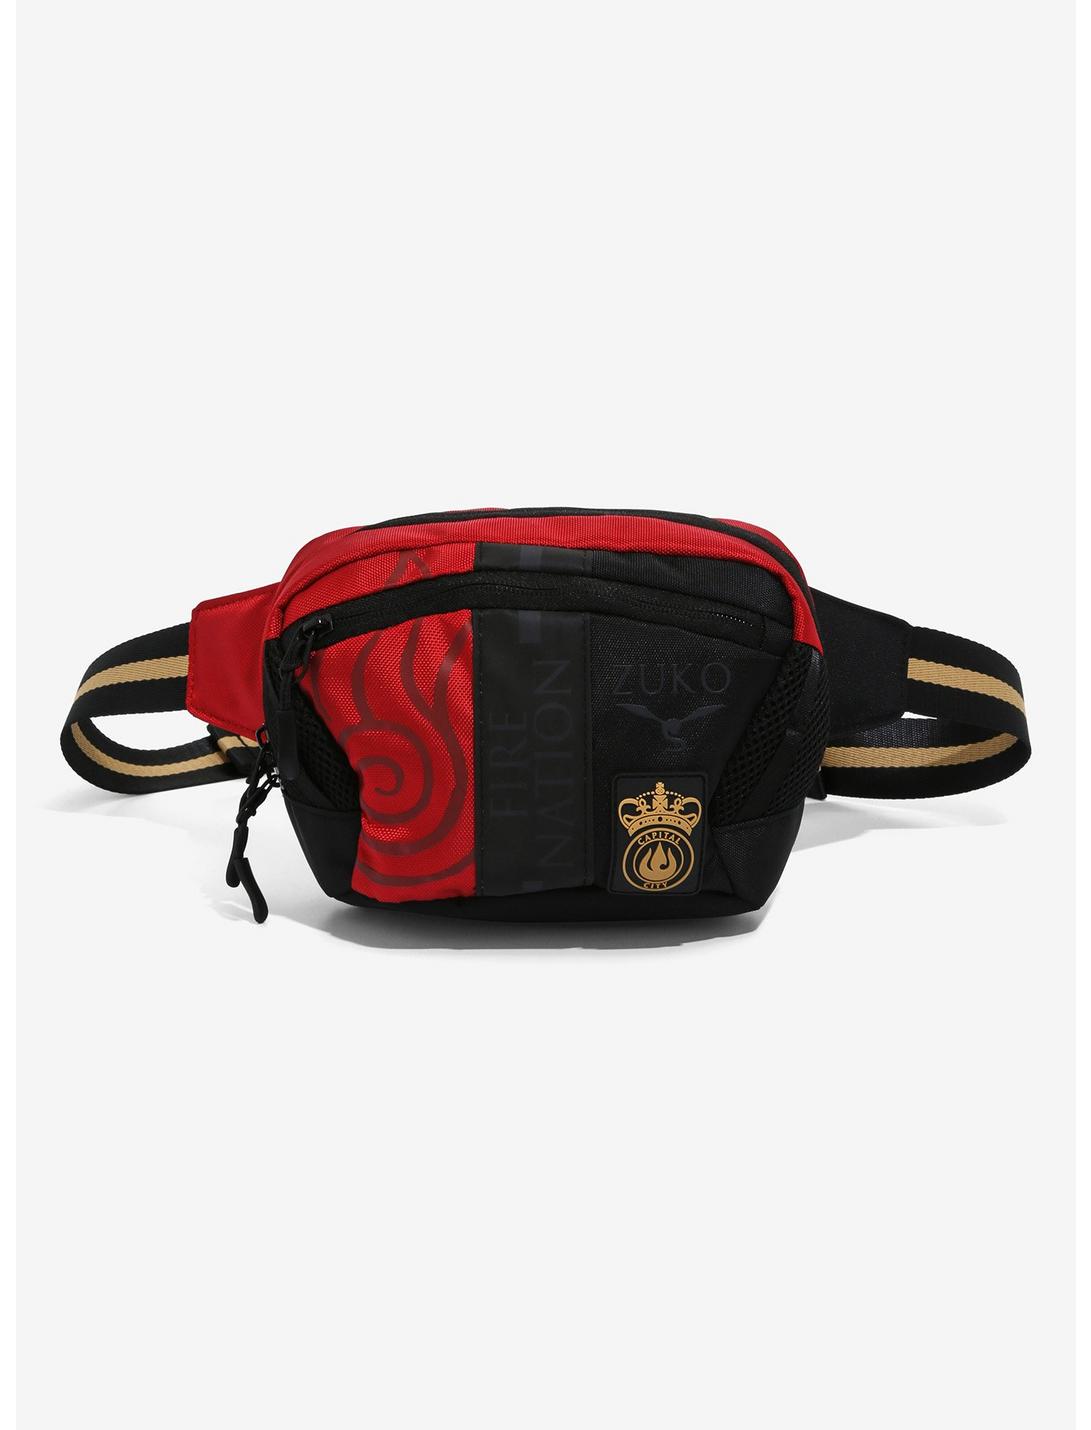 Avatar: The Last Airbender Zuko Fanny Pack - BoxLunch Exclusive, , hi-res